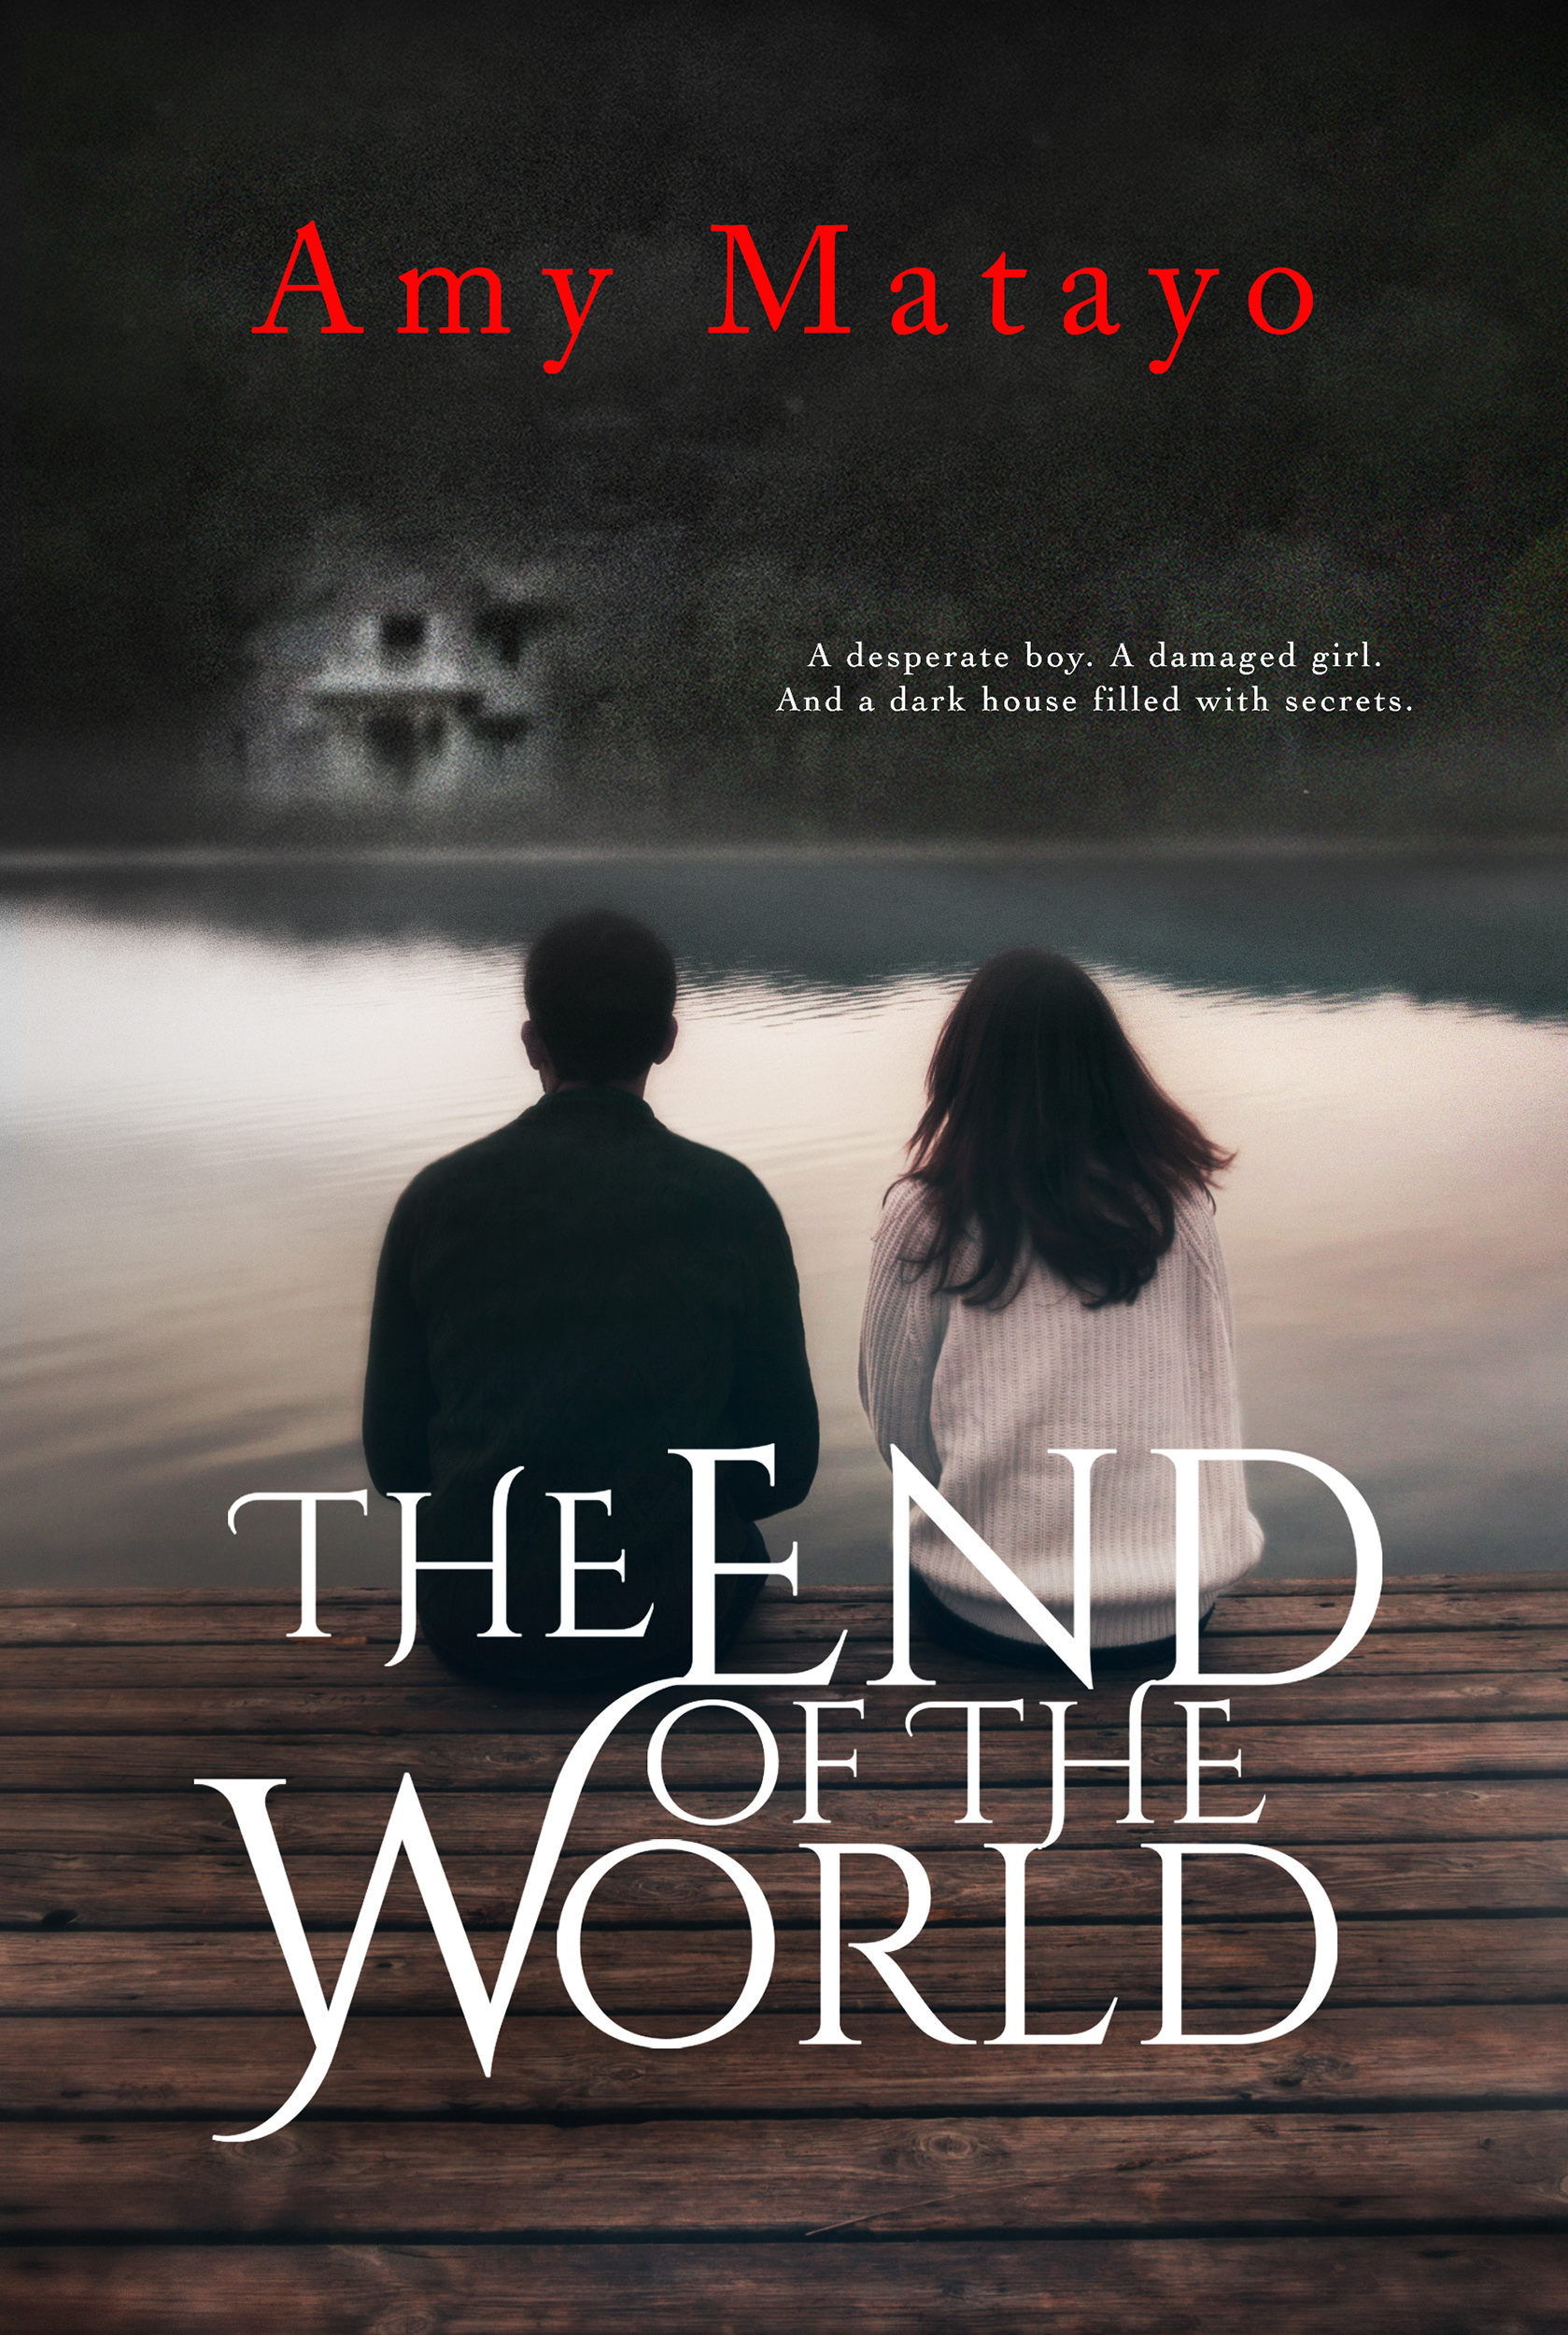 The End of the World by Amy Matayo